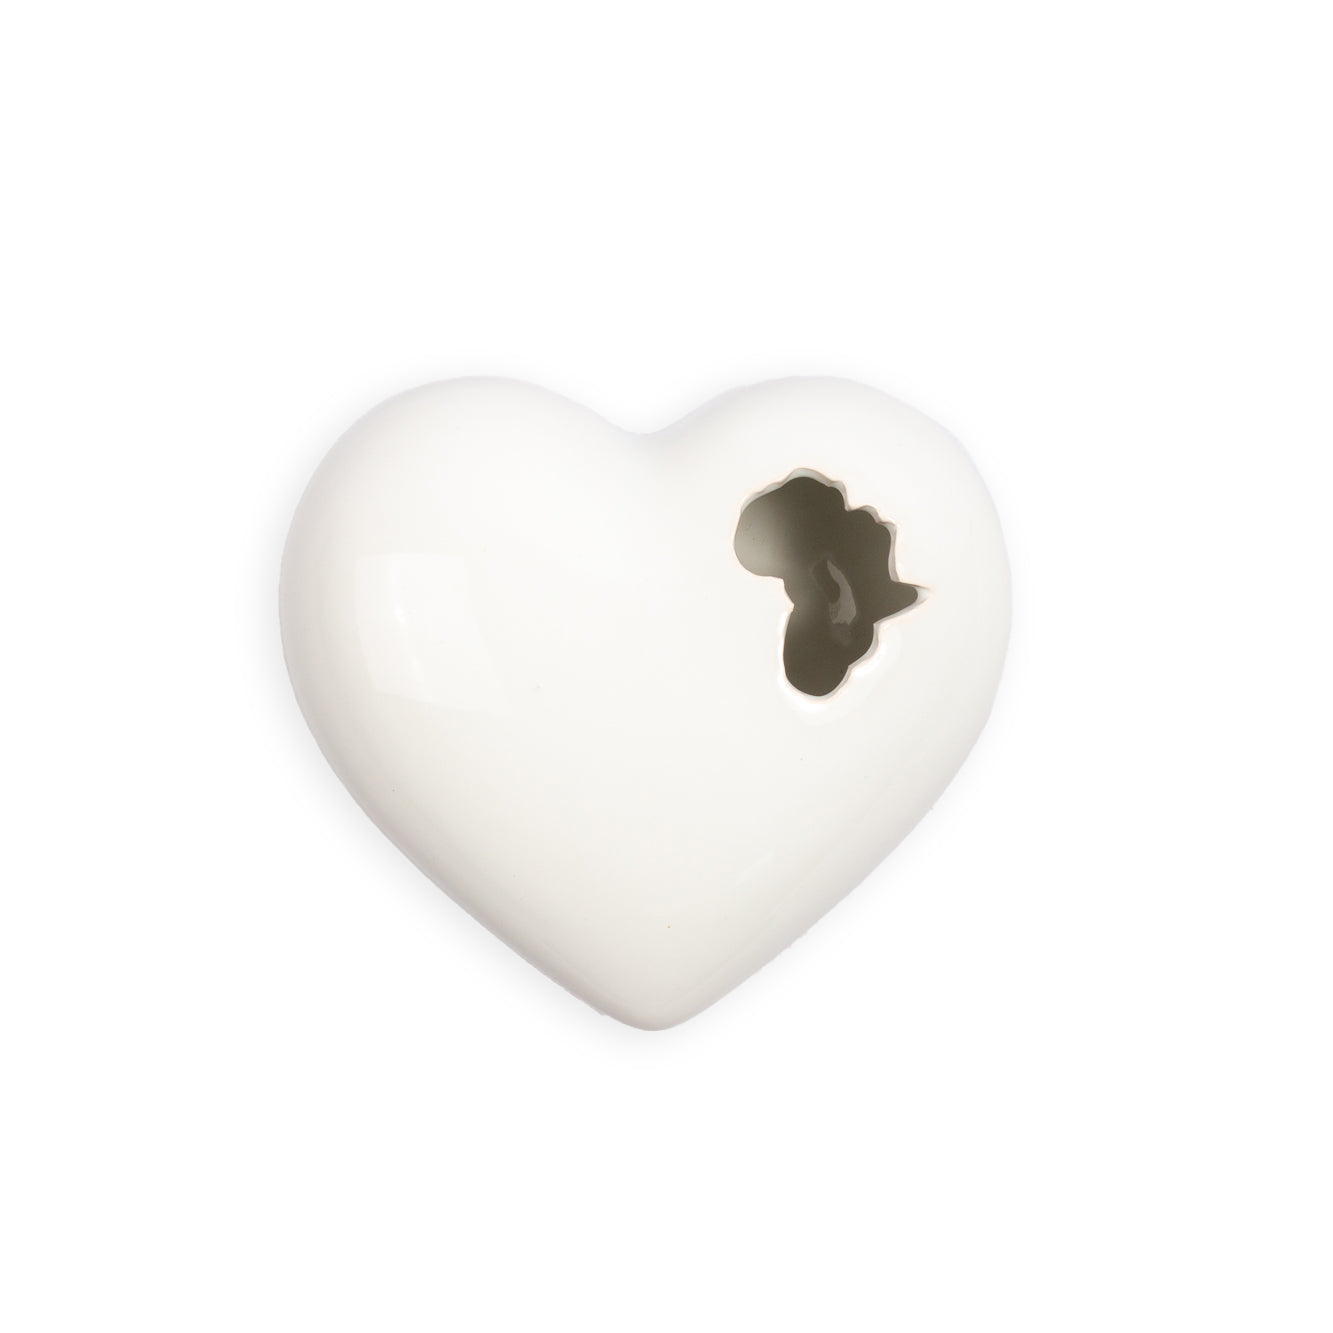 A handcrafted ceramic heart-shaped wall art piece, with intricate details and an African-inspired design, perfect for adding a touch of cultural pride and beauty to any home decor.